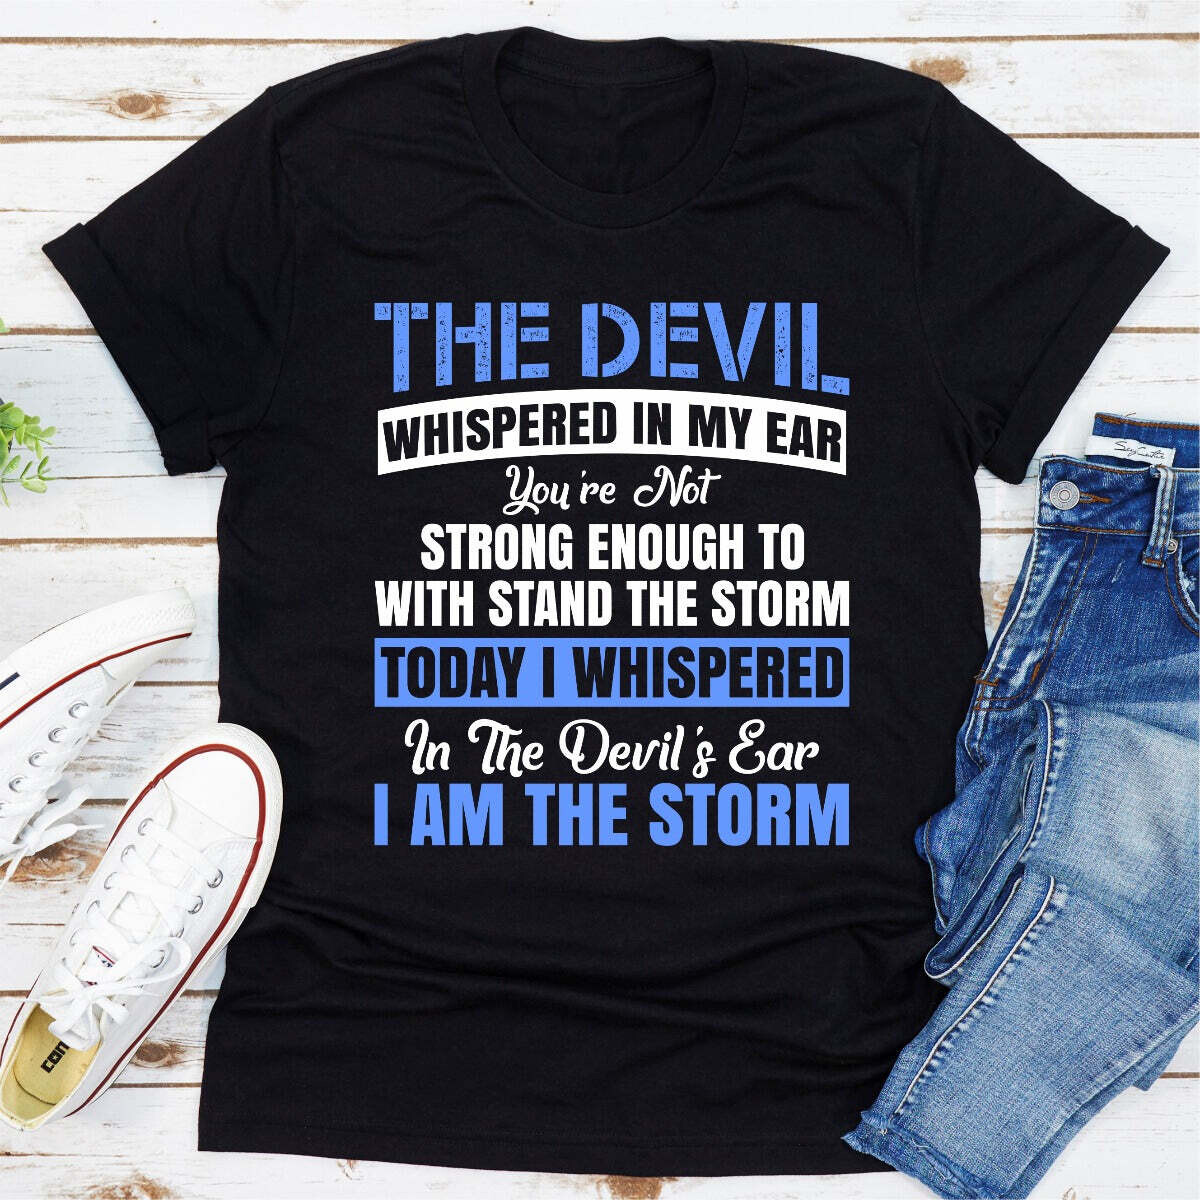 The Devil Whispered In My Ear T-Shirt